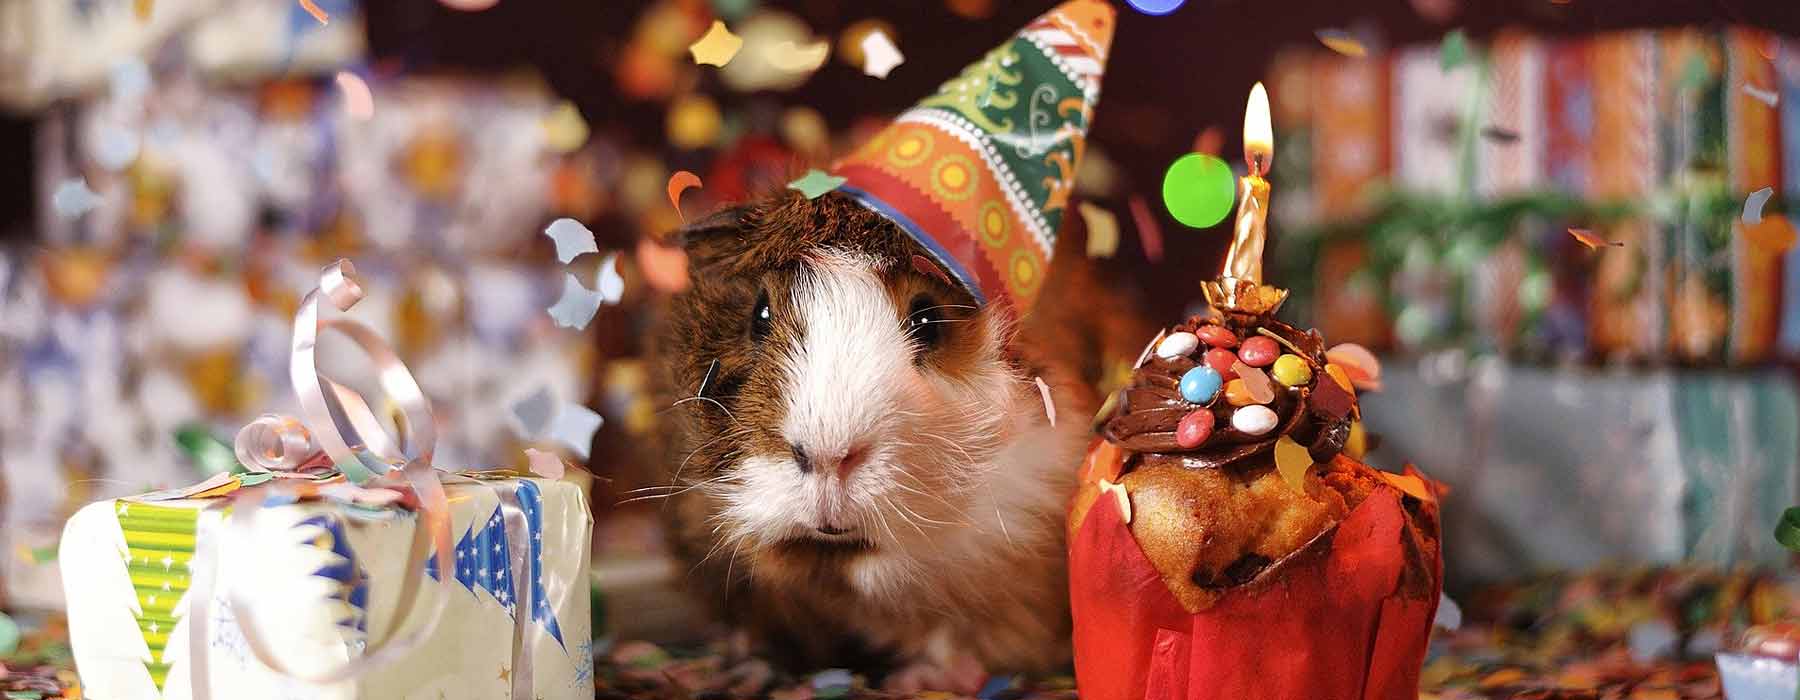 guinea pig wearing a party hat